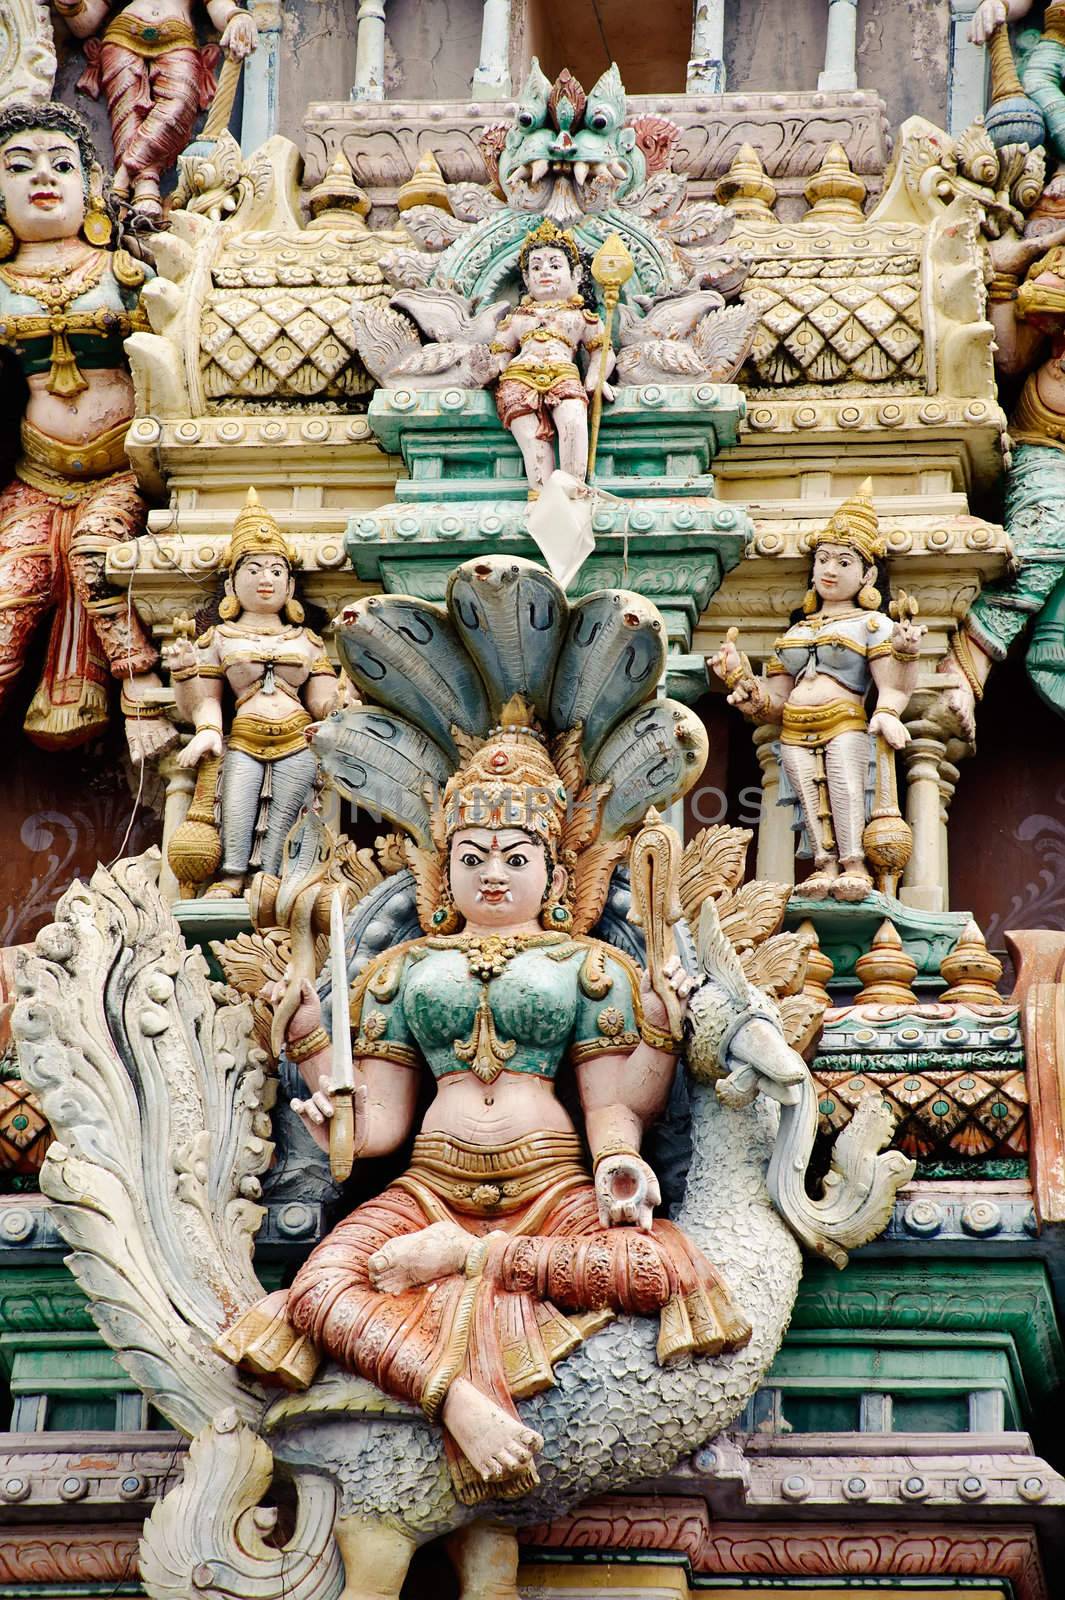 Hindu temple with statues of India god in roof.